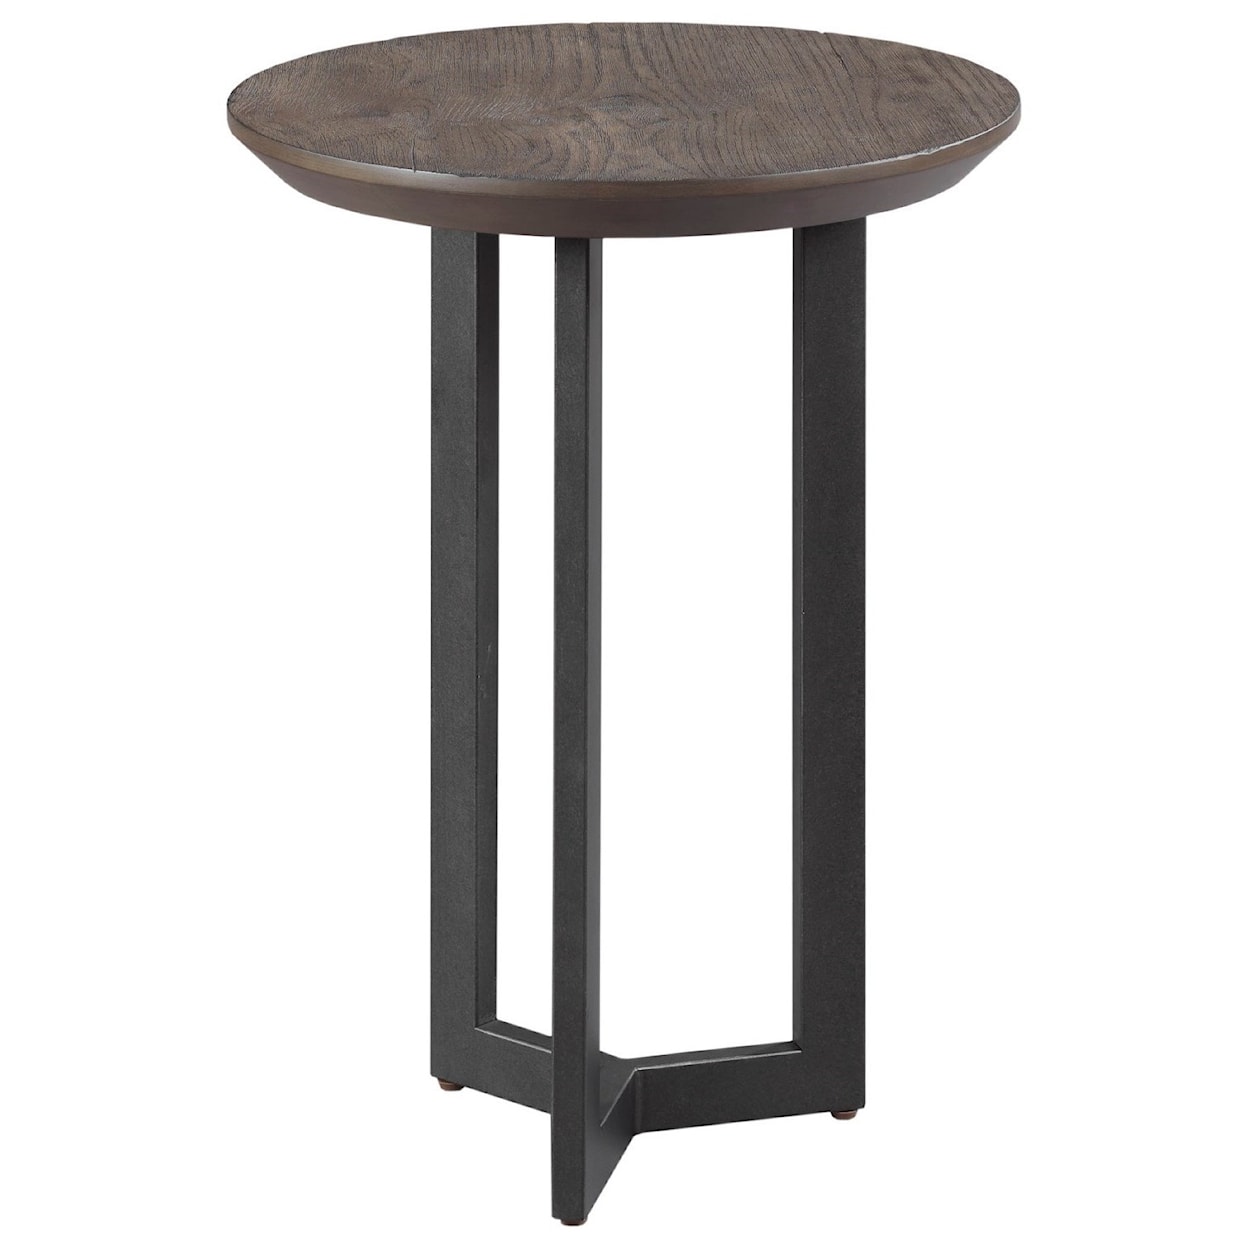 Alexvale Graystone Round Chairside Table